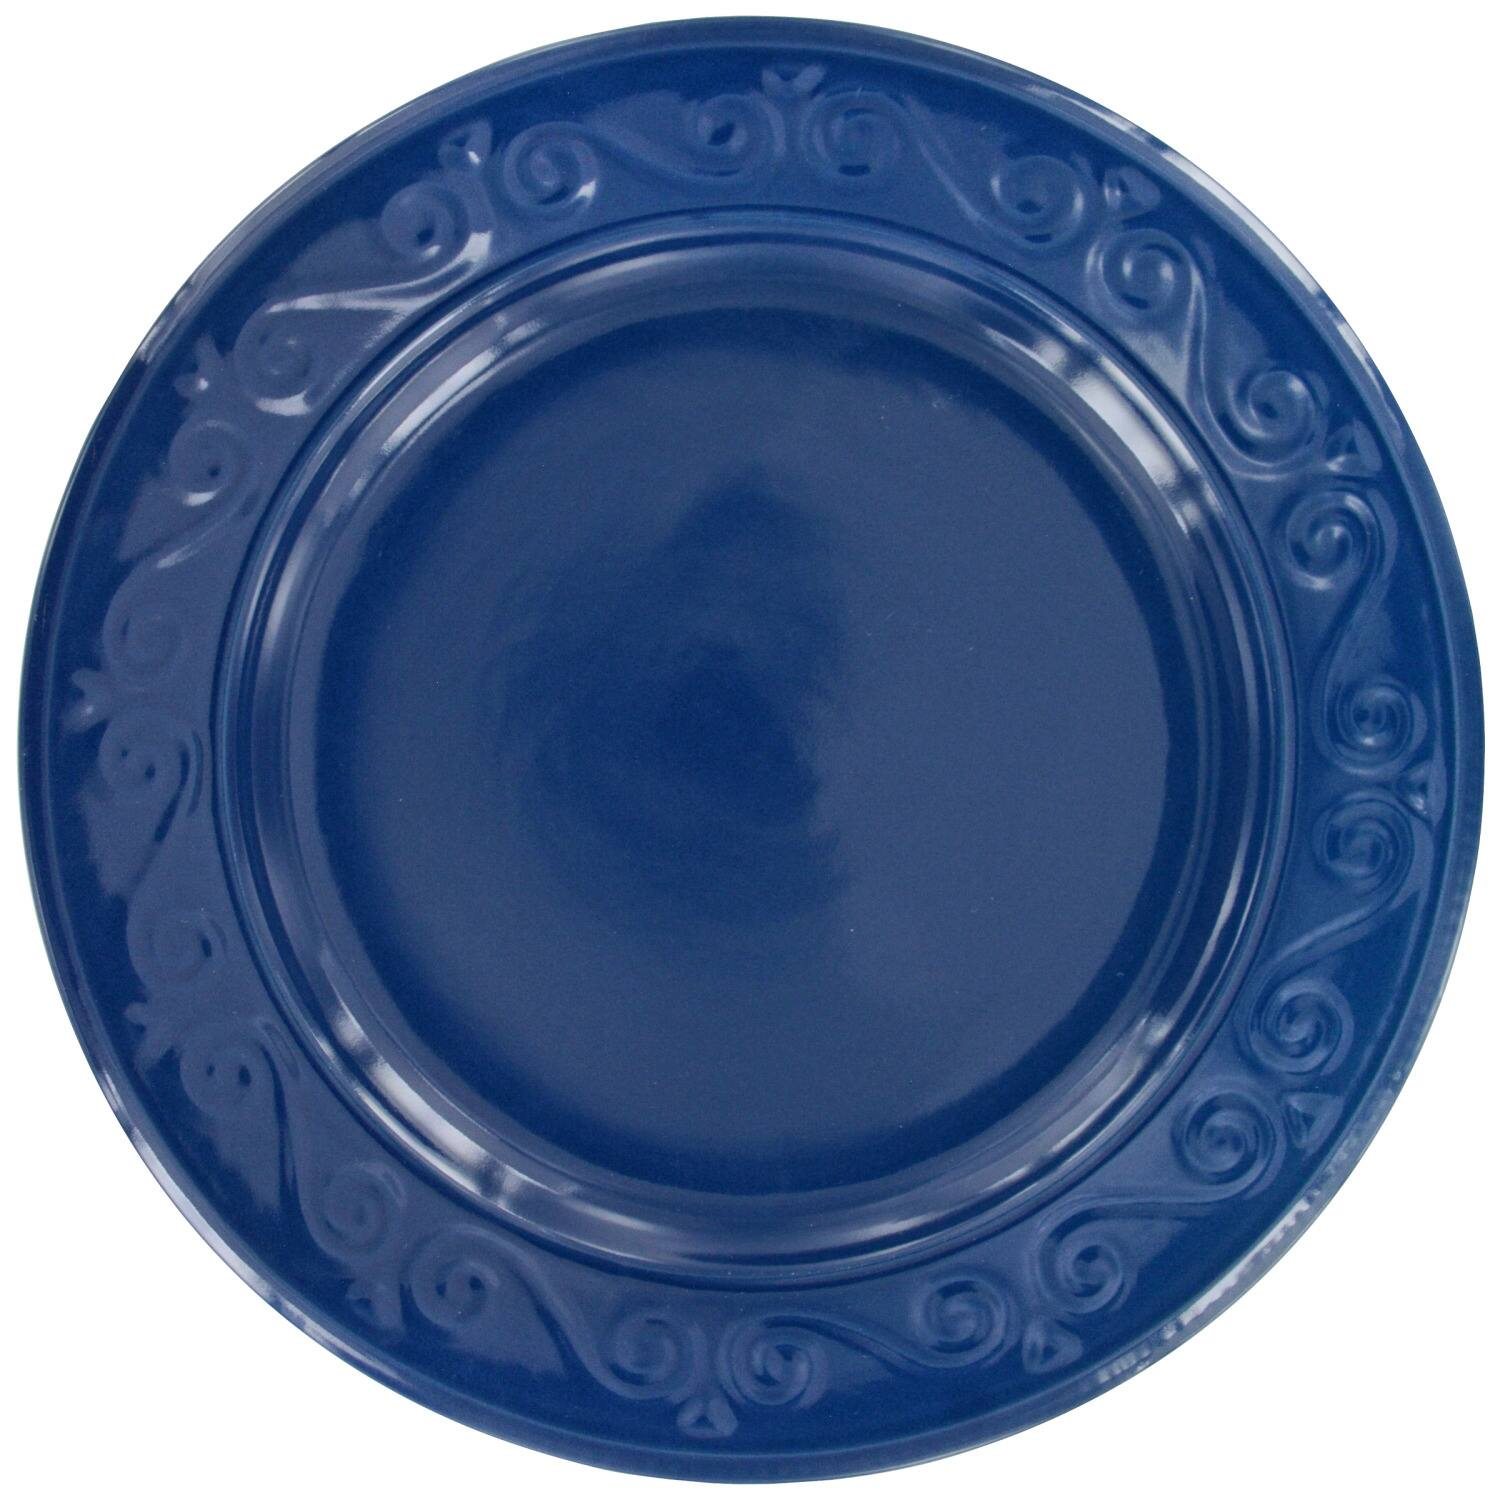 Navy Blue Embossed Scroll Pattern Stoneware Dinner Plates, 10.5 in.